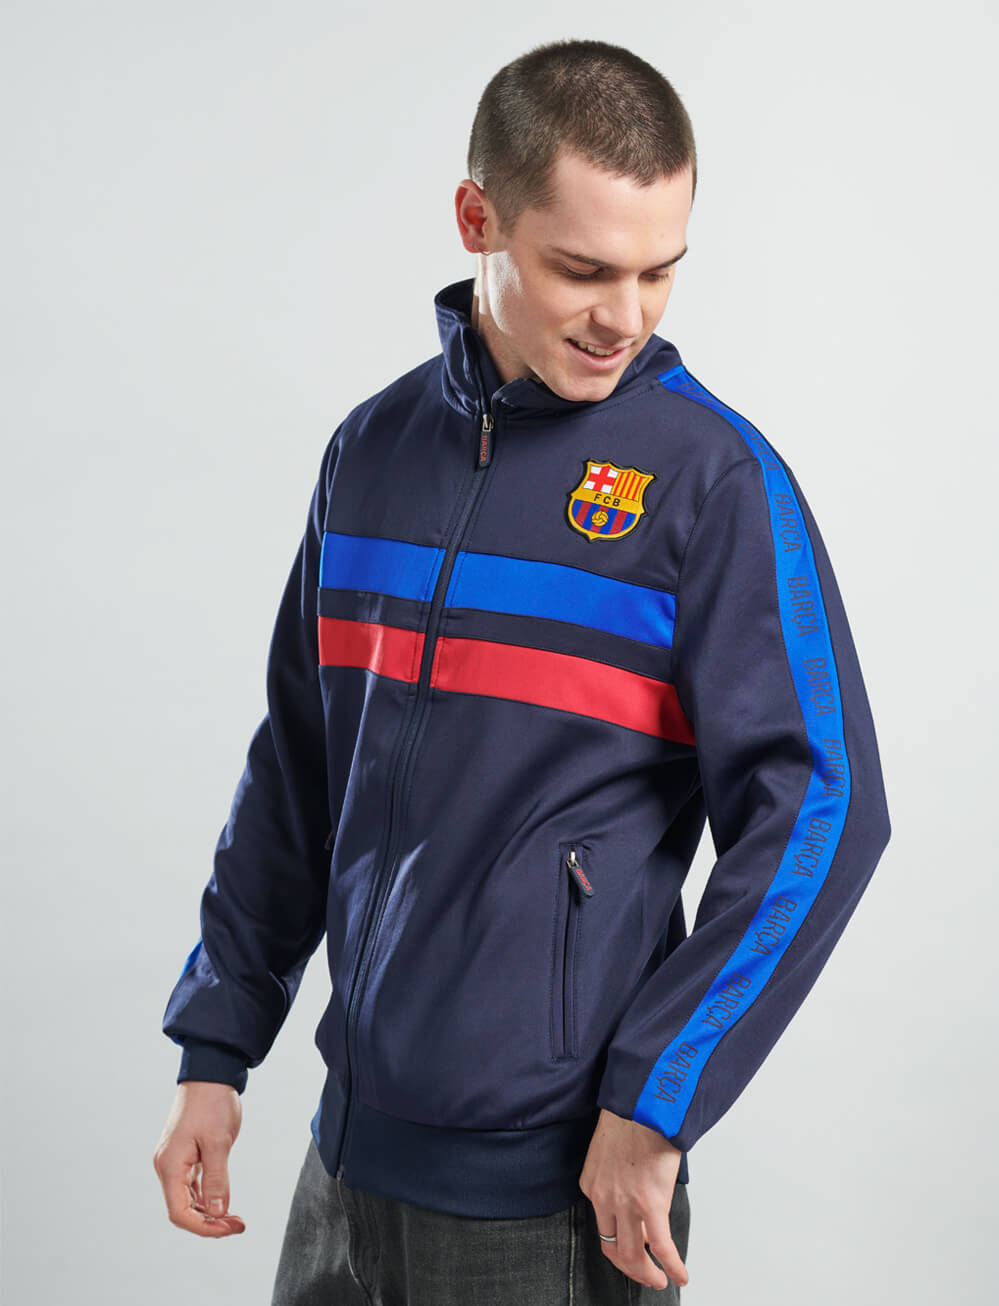 Official FC Barcelona Track Jacket - Navy - The World Football Store